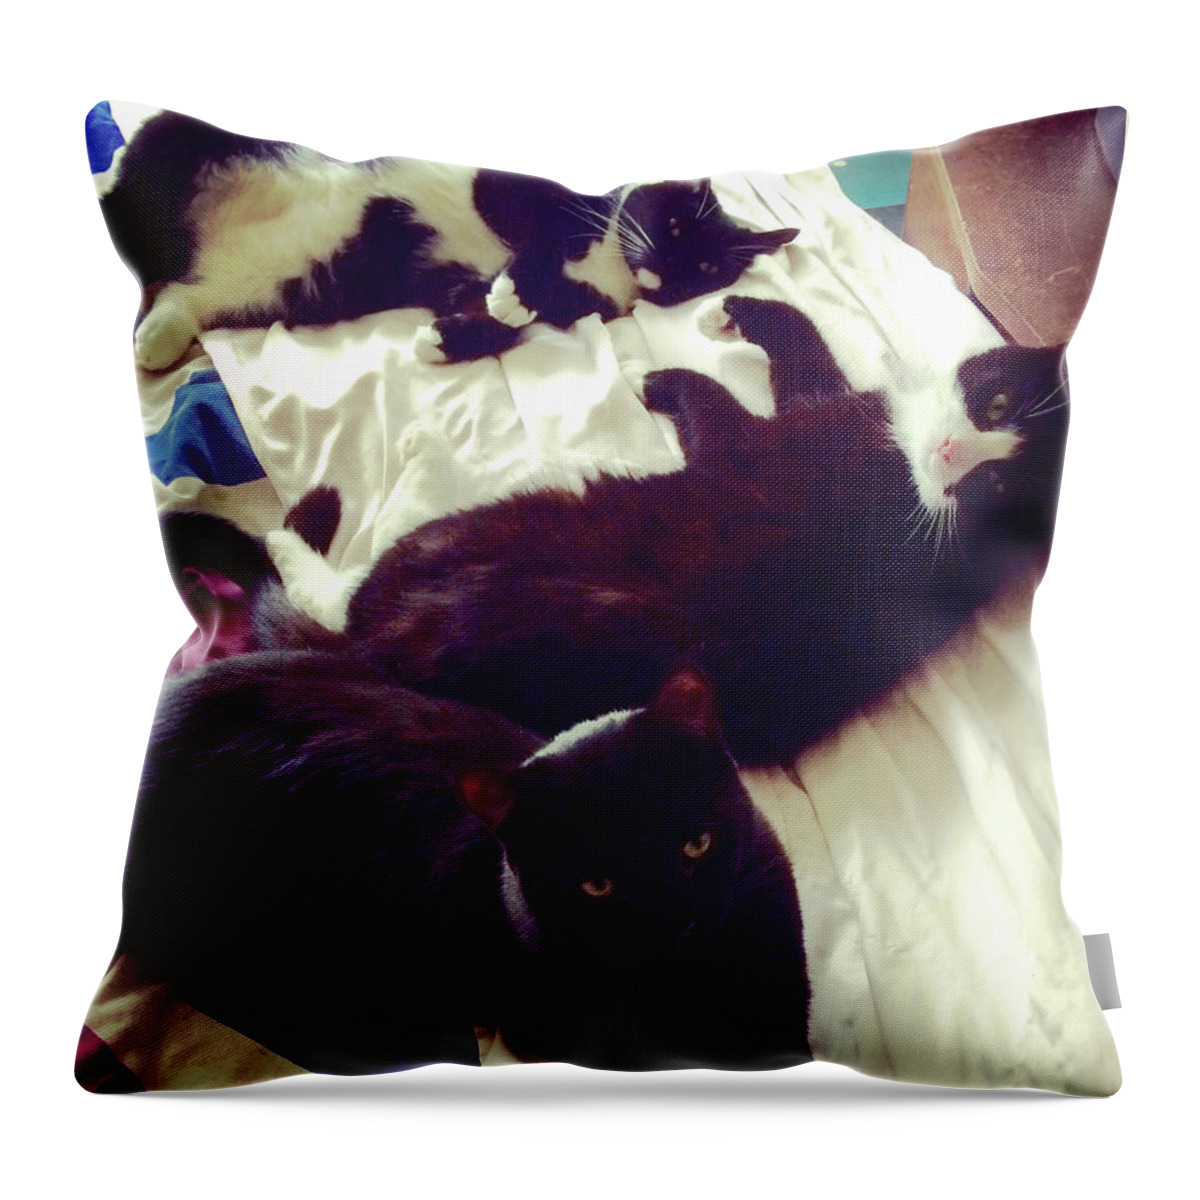 Uk Throw Pillow featuring the photograph British Cats by Heather Lennox